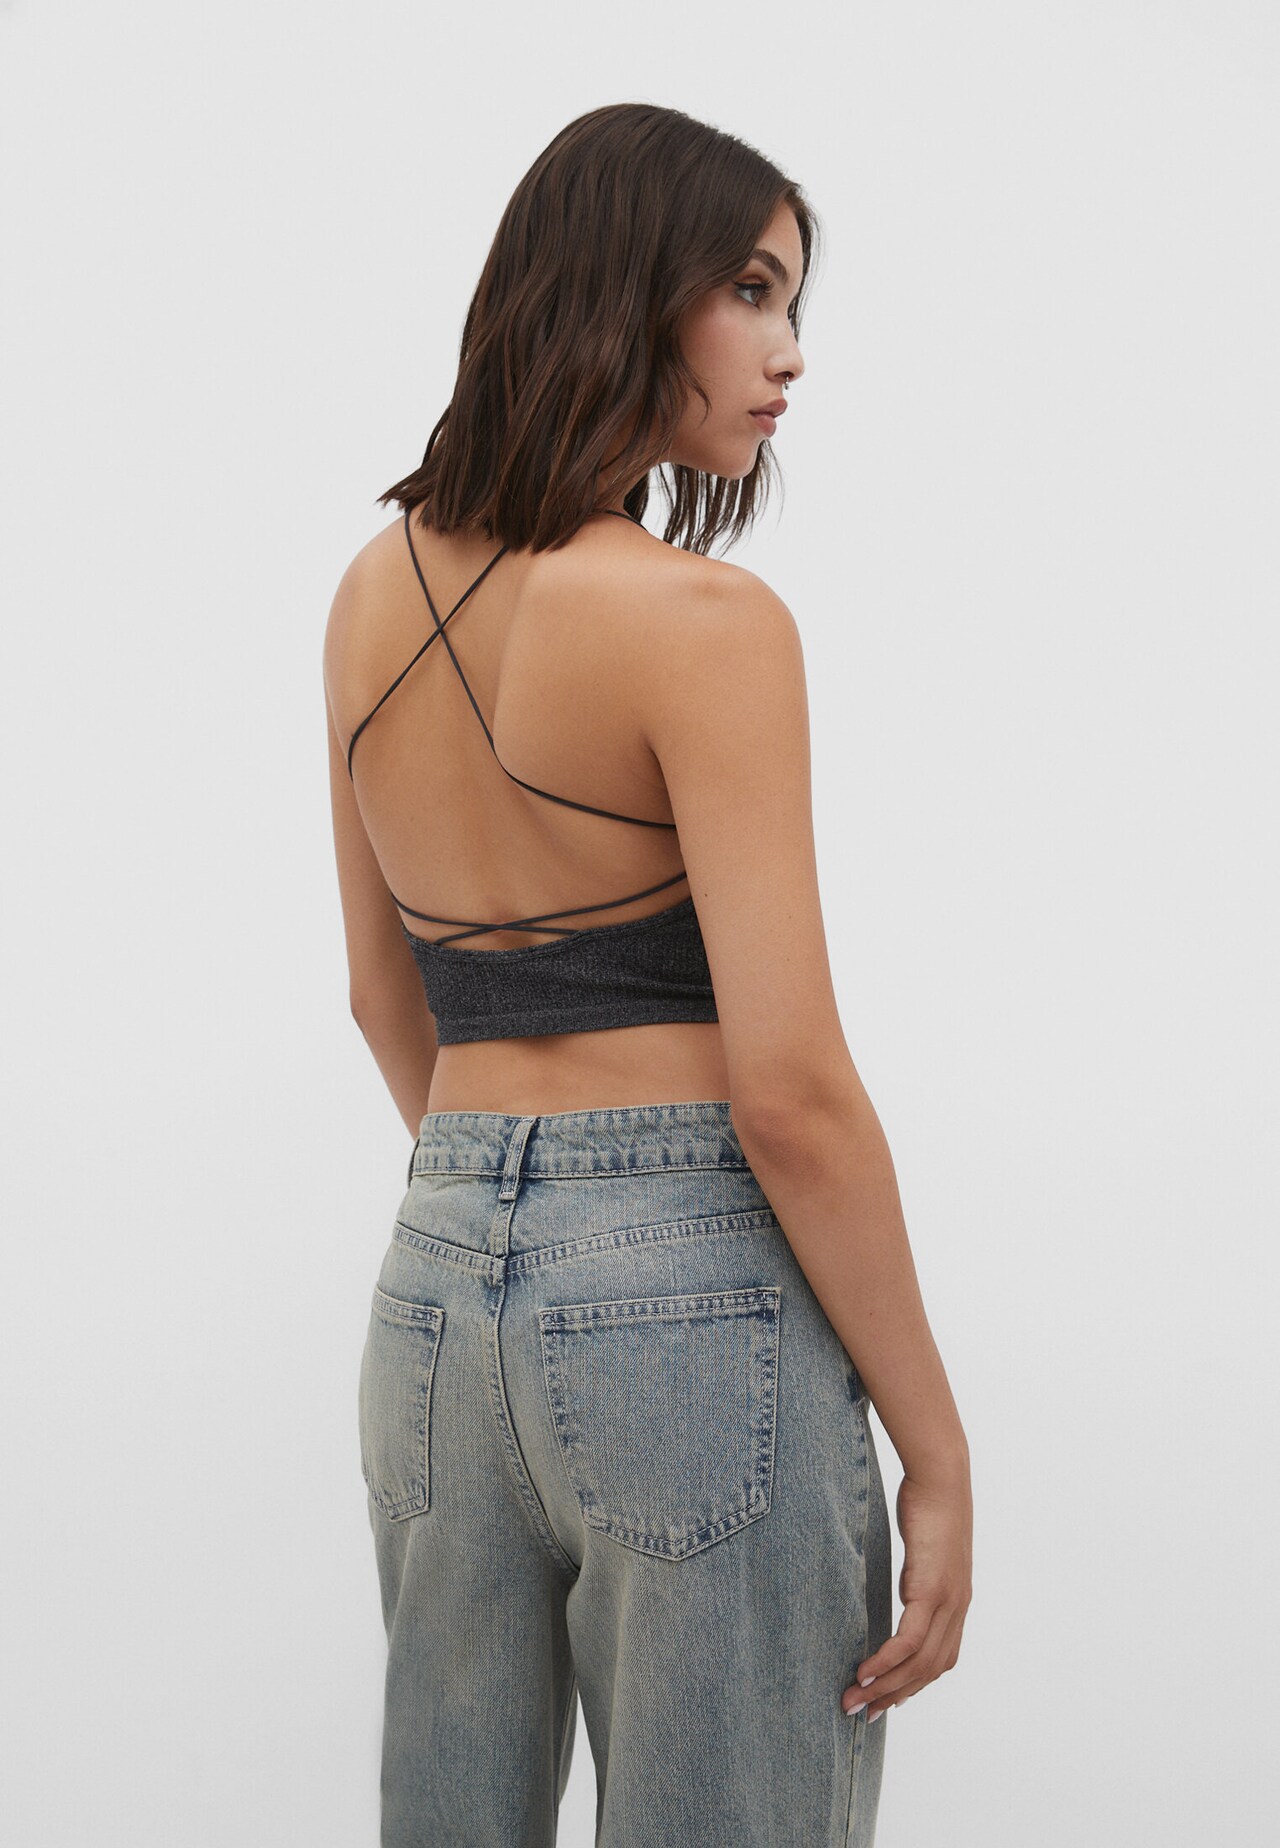 Stradivarius + Seamless top with embellished back